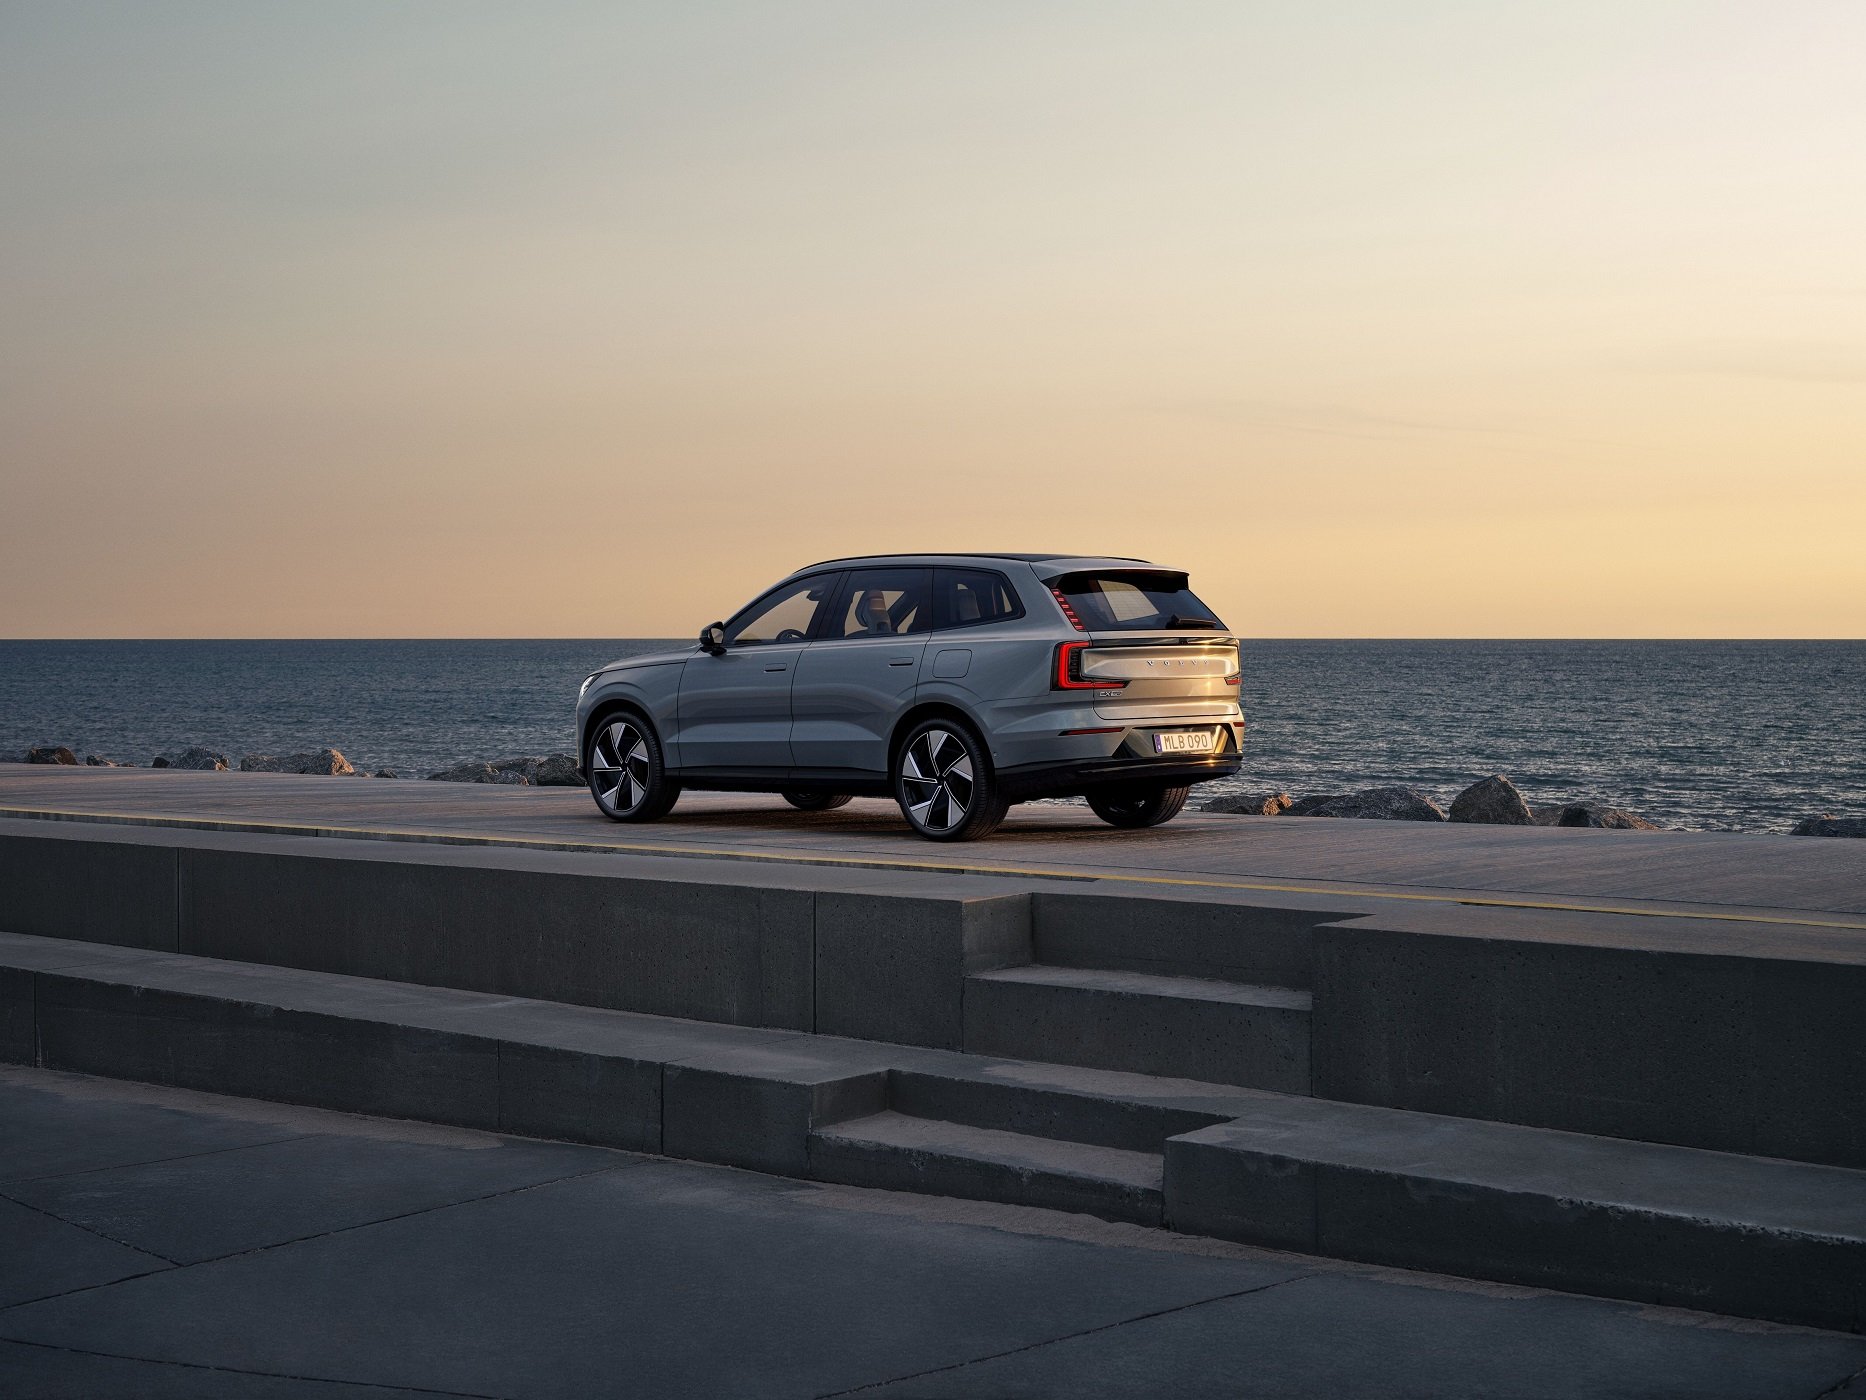 PRL: The new fully electric Volvo EX90 the start of a new era for Volvo Cars